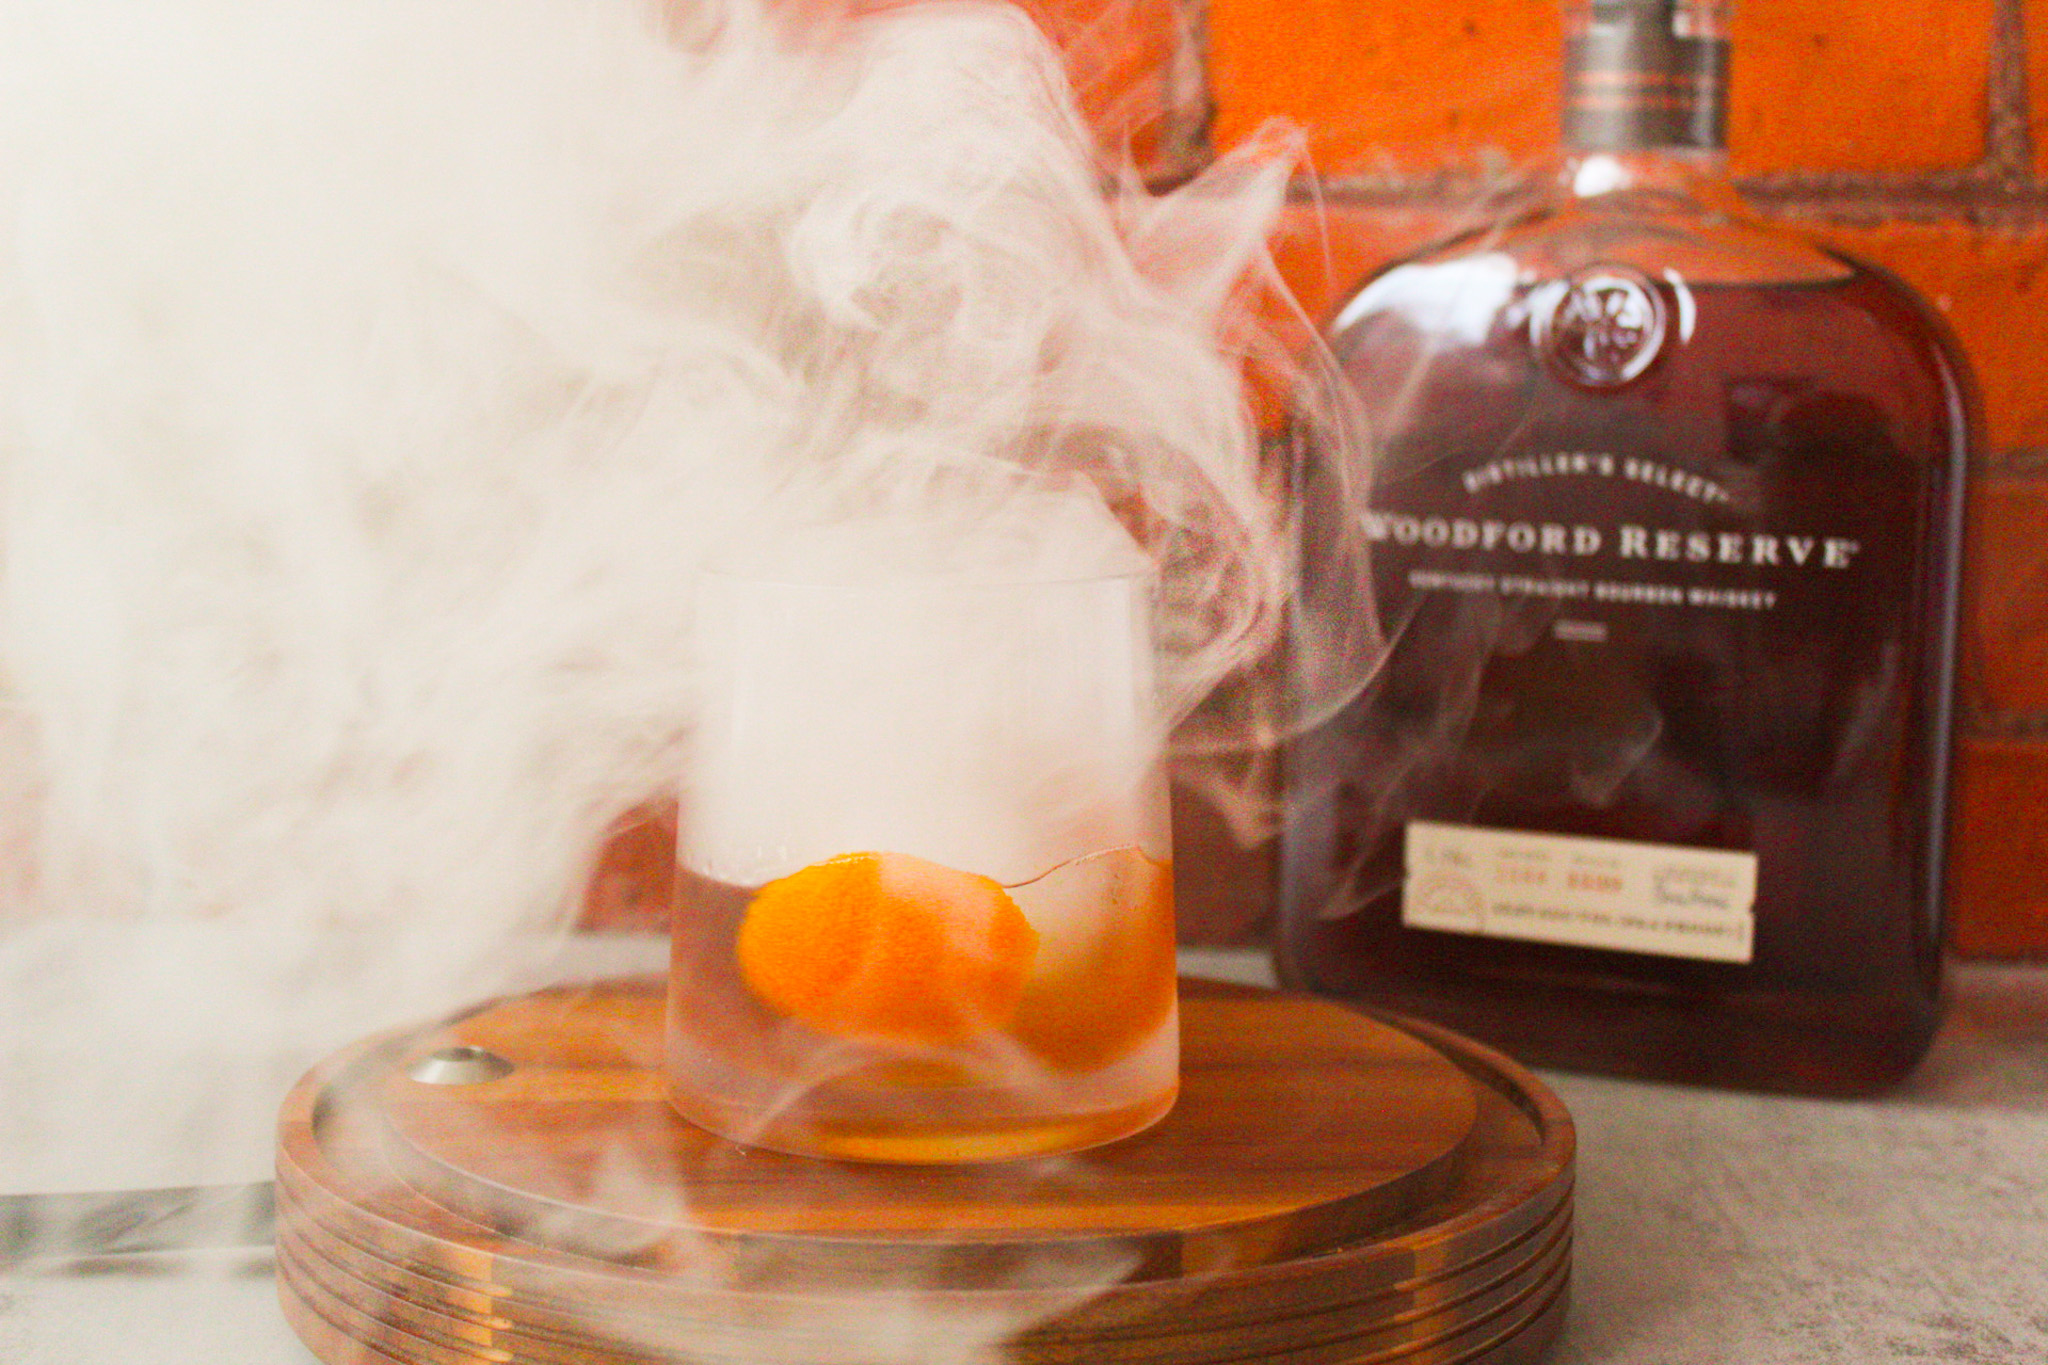 https://www.cuisineandcocktails.com/wp-content/uploads/2019/10/smoked-old-fashioned-drink.jpg